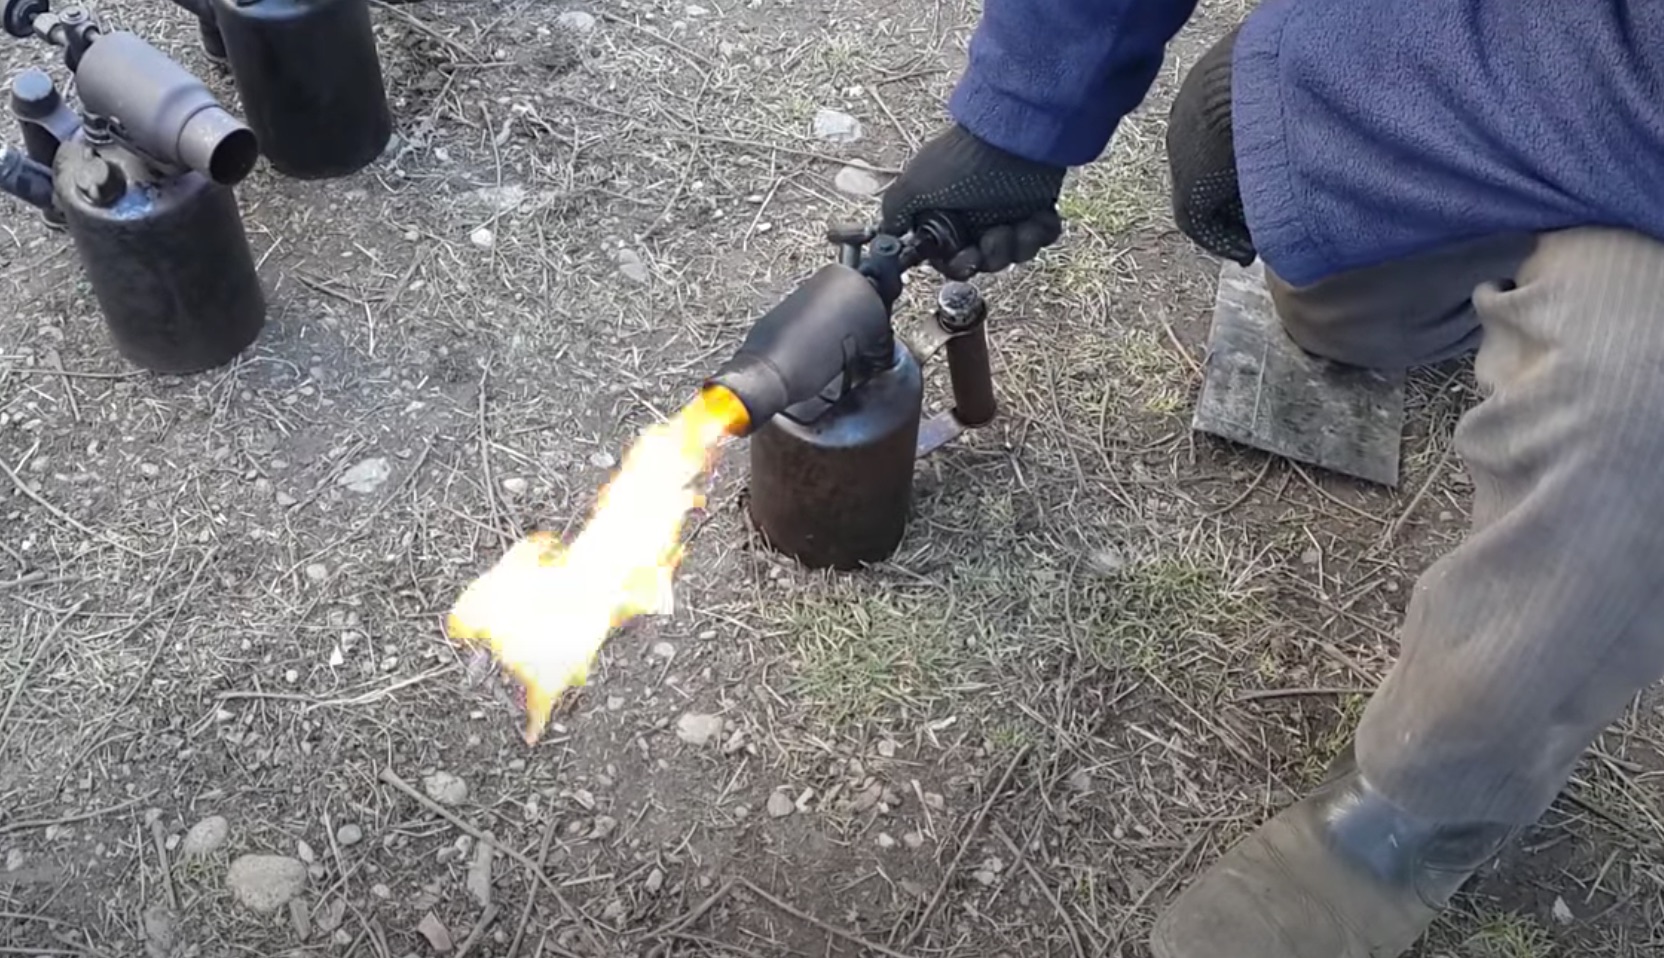 Ukrainian Soldiers Take Russian Soldier And Torture Him With A Blowtorch